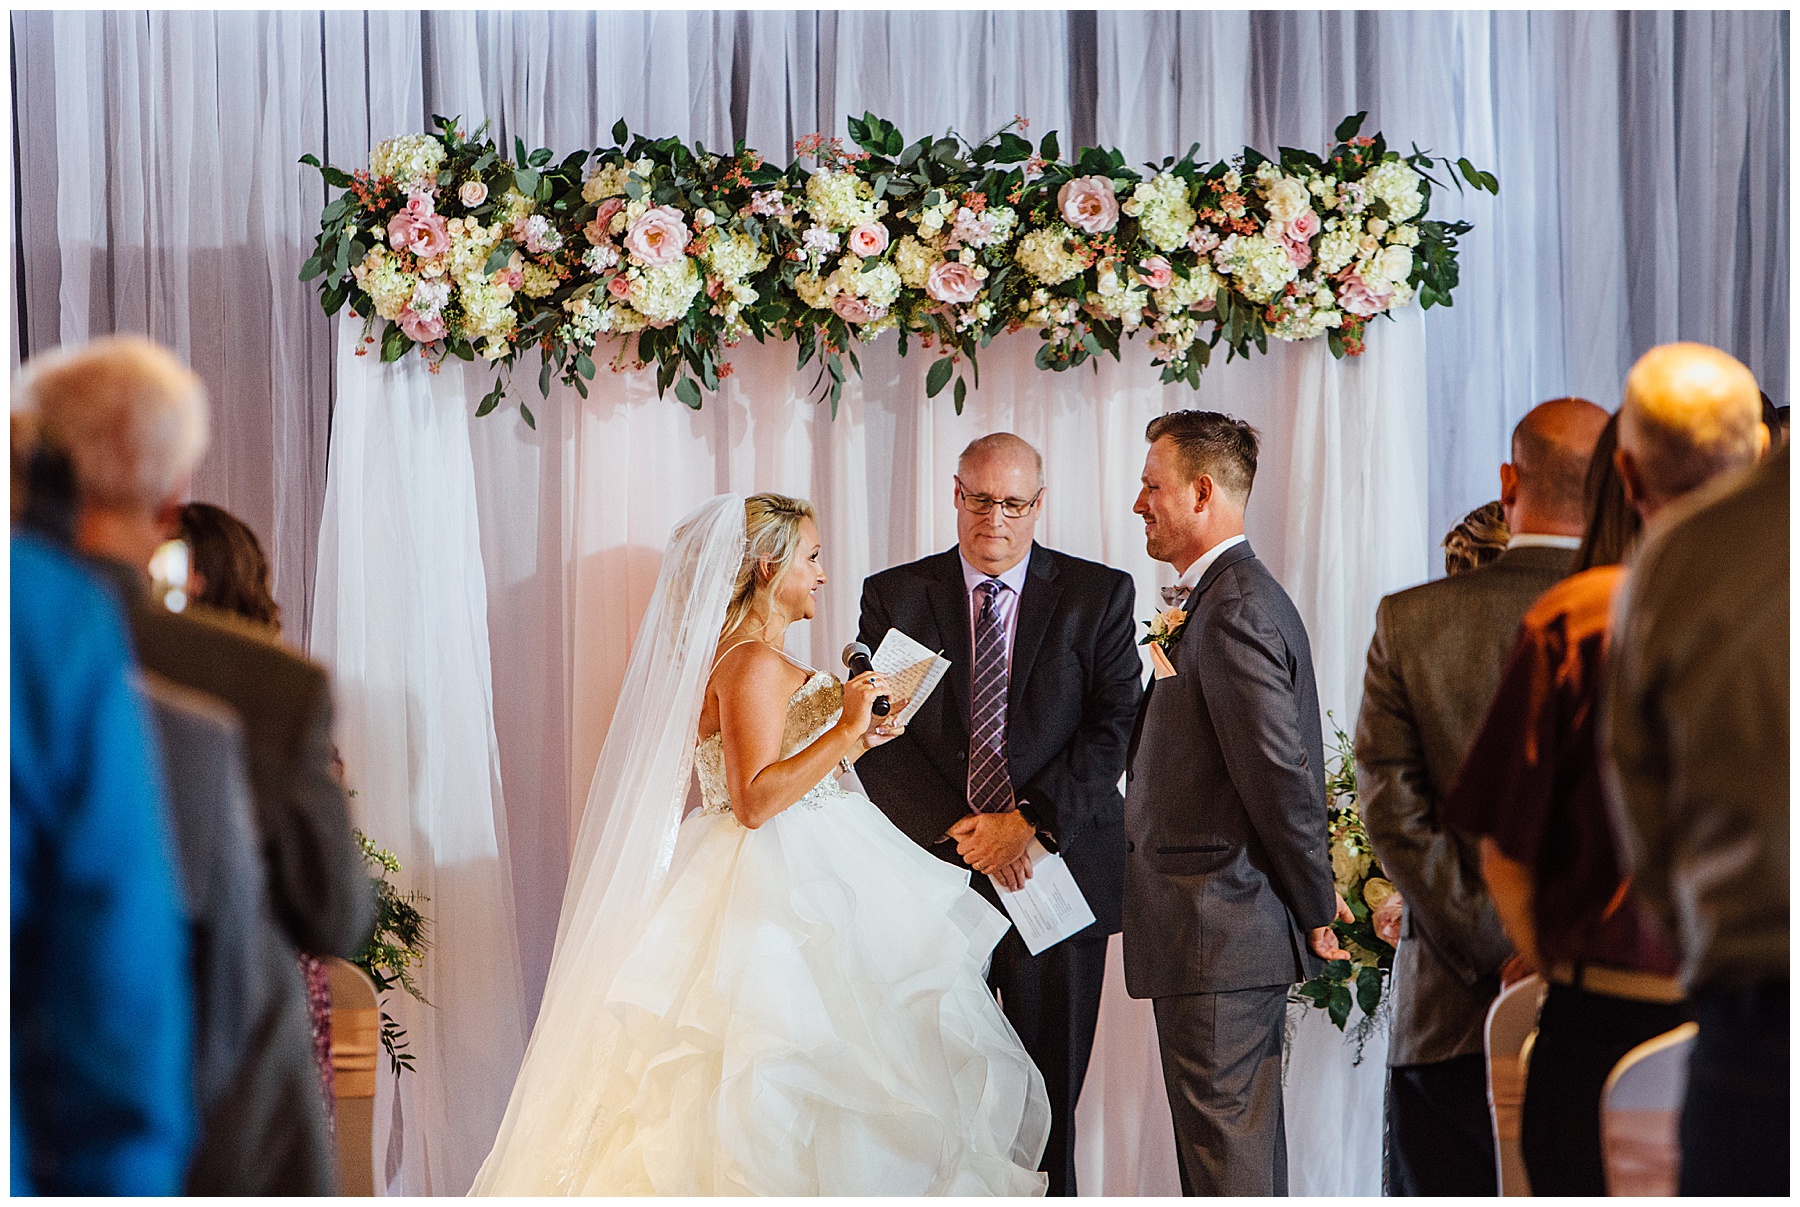 vows during cermony at diamond room